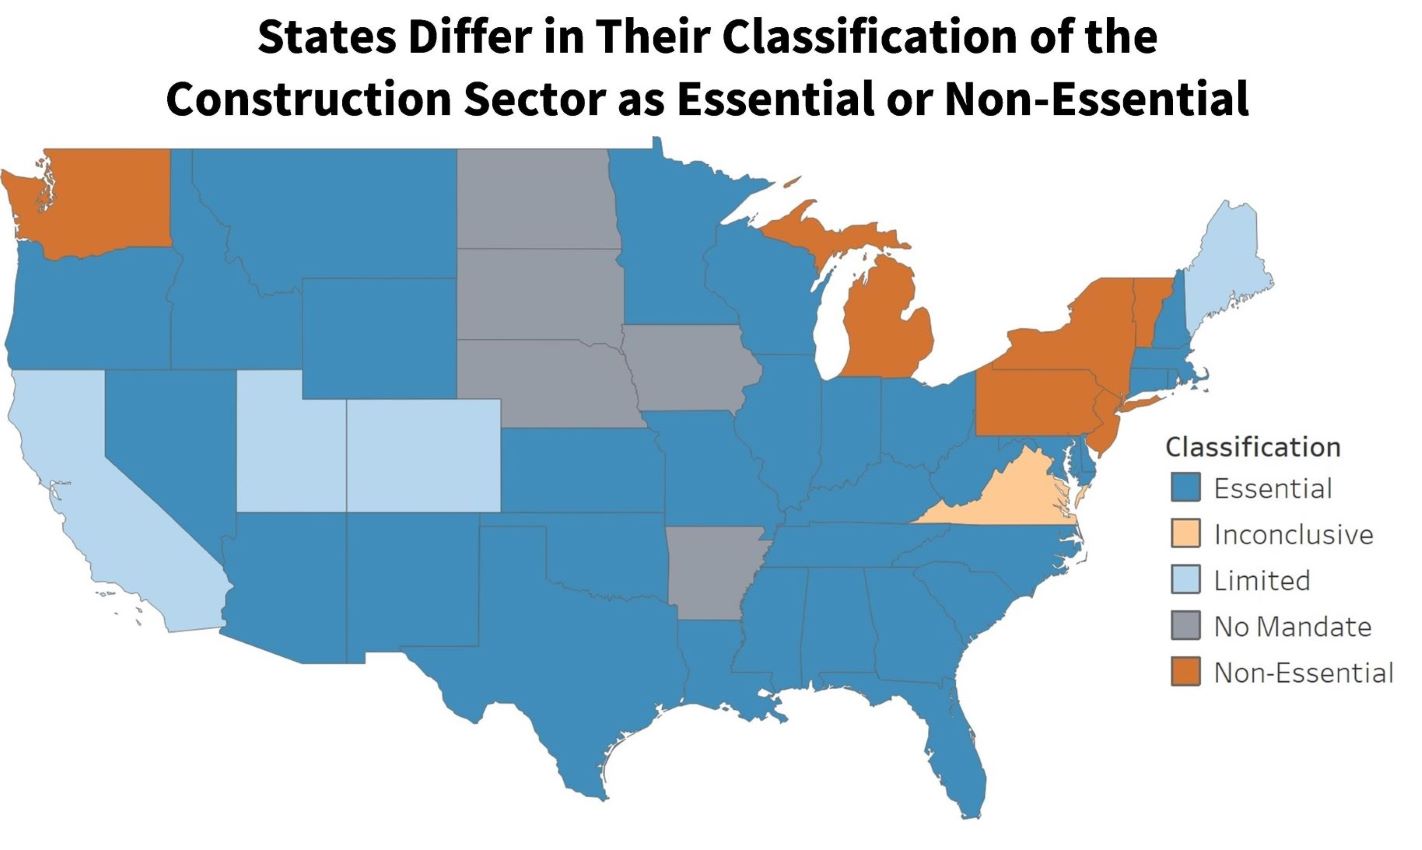  States Differ in Their Classification of the Construction Sector as Essential or Non-Essential 